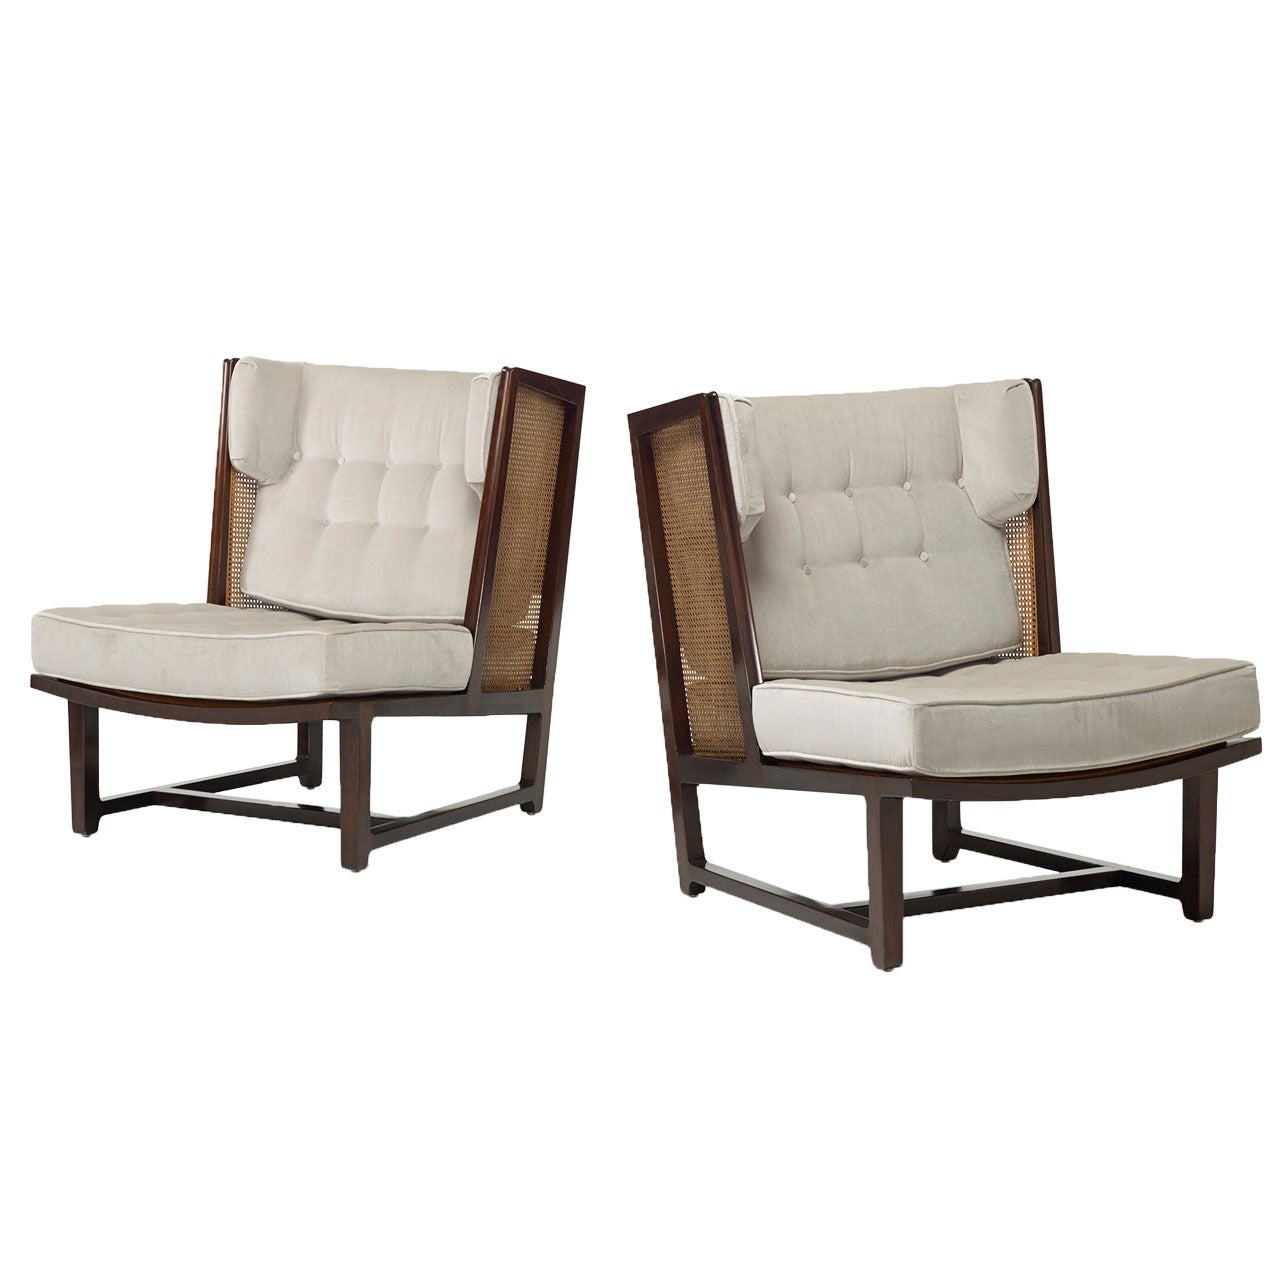 Wing Lounge Chairs, Model 6016 Pair by Edward Wormley for Dunbar